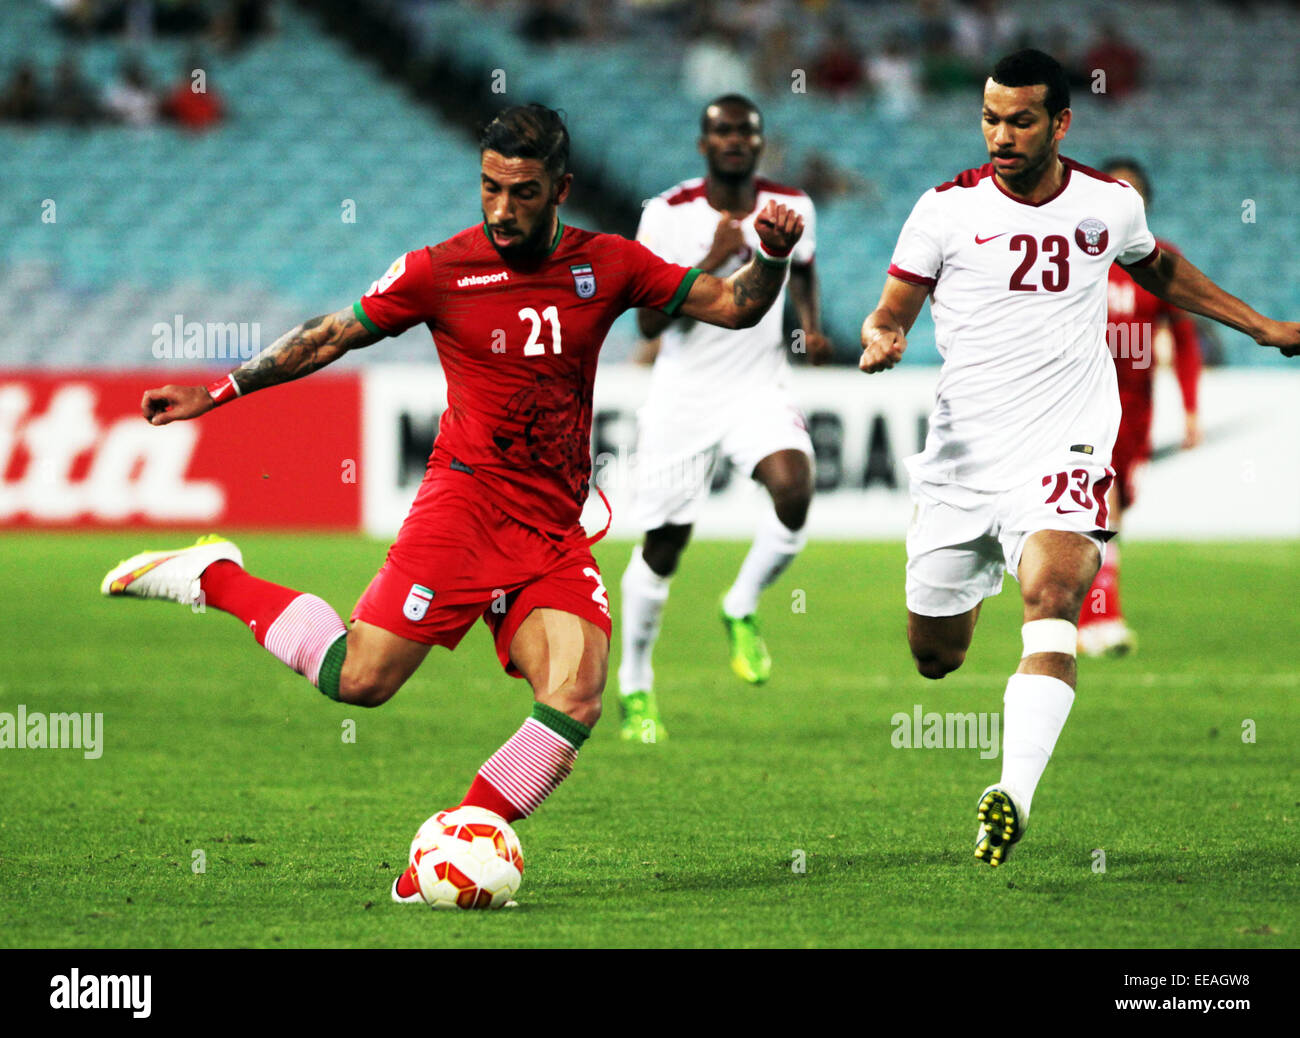 Sydney, Australia. 15th January, 2015. Ashkan Dejagah of Iran competes during a Group C match against Qatar of the AFC Asian Cup in Sydney, Australia, Jan. 15, 2015. Iran won 1-0. (Xinhua/Jin Linpeng) © Xinhua/Alamy Live News Stock Photo